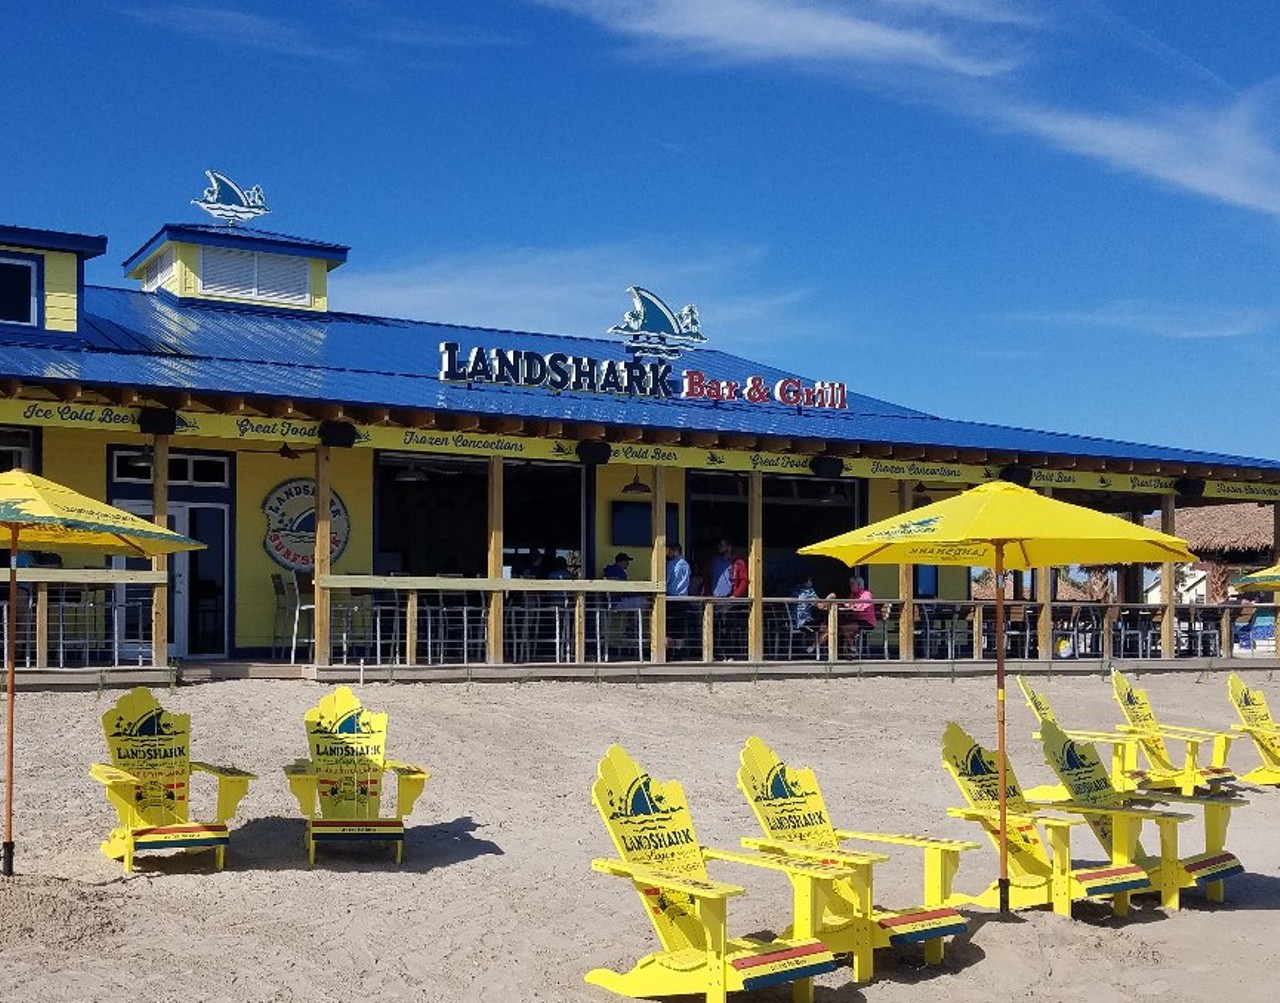 LandShark Bar & Grill
471 S Atlantic Ave., Daytona Beach, (386) 256-1248
Modeled after Margaritaville, this is a must stop for Jimmy Buffet-lovers everywhere who enjoy sipping on a cold one while also taking in the sights of the shore. The live music and uber-tropical decor attempts to transport guests to an island elsewhere. To make sure you really take in the atmosphere of the beer company, you can&#146;t leave without trying their LandShark Burger paired with their, you guessed it, LandShark beer.
Photo via LandShark Bar & Grill/Facebook